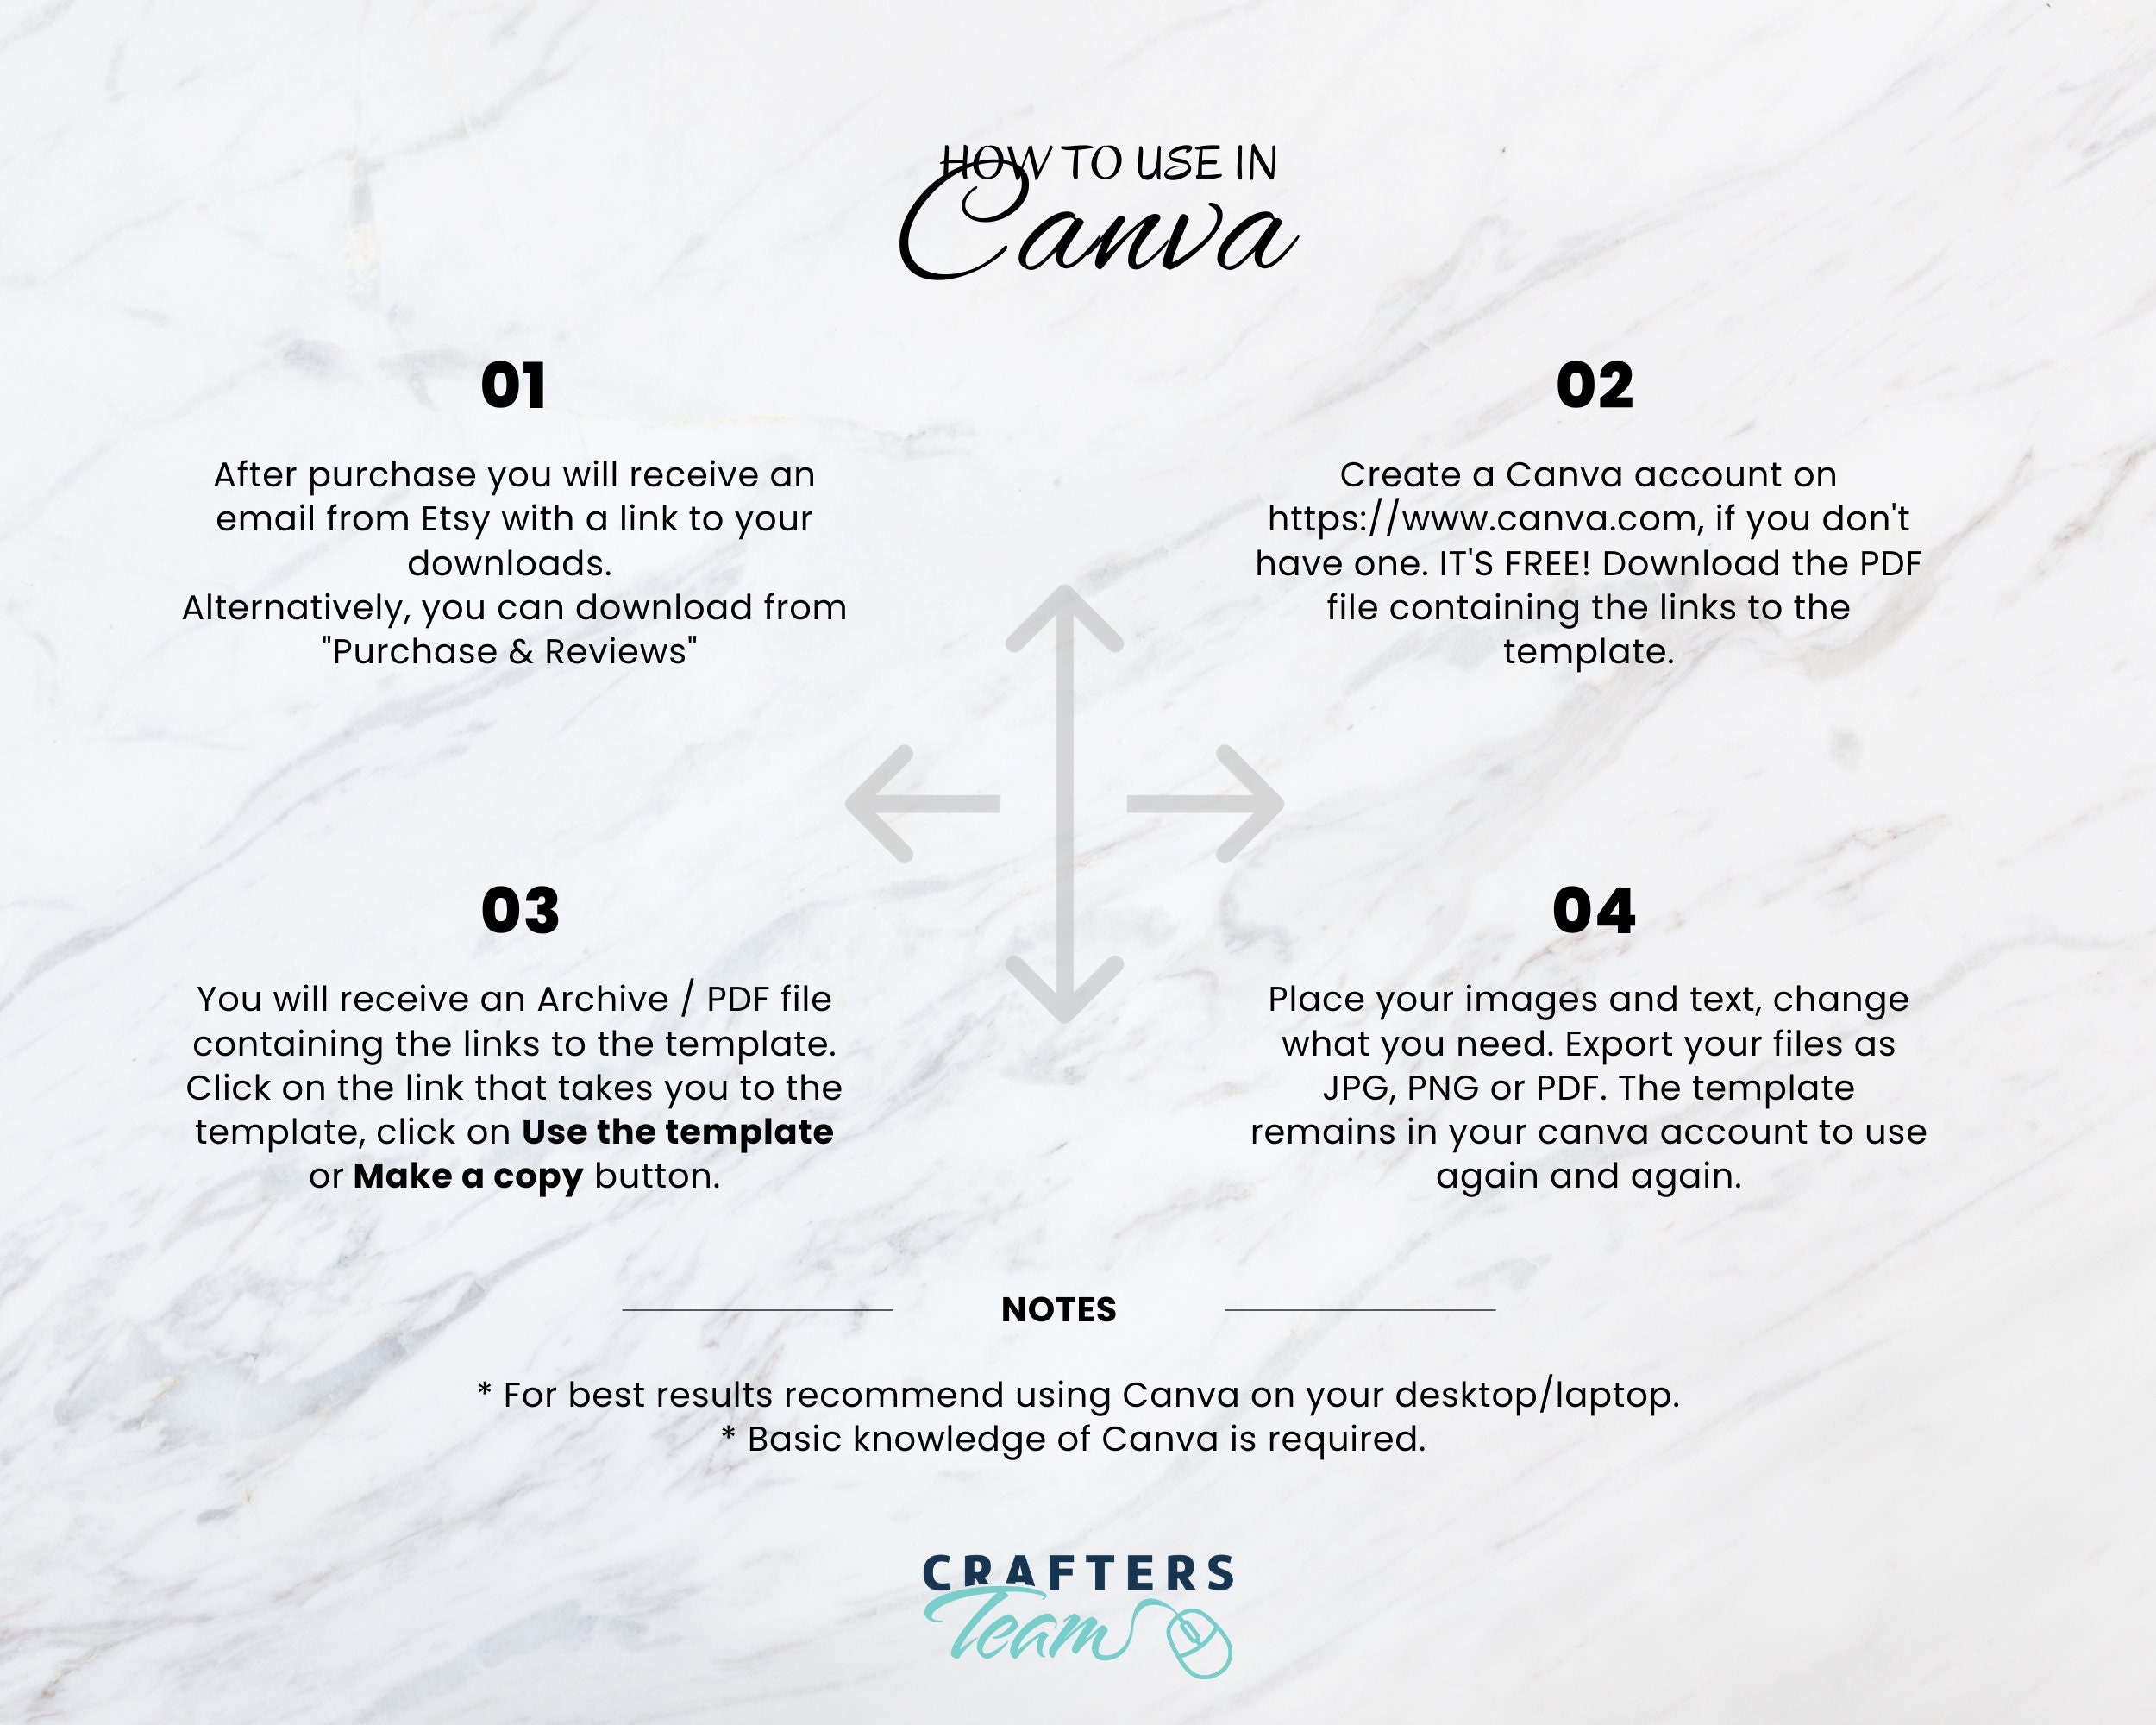 Capability Statement Template Canva, Corporate Flyer, Business ...